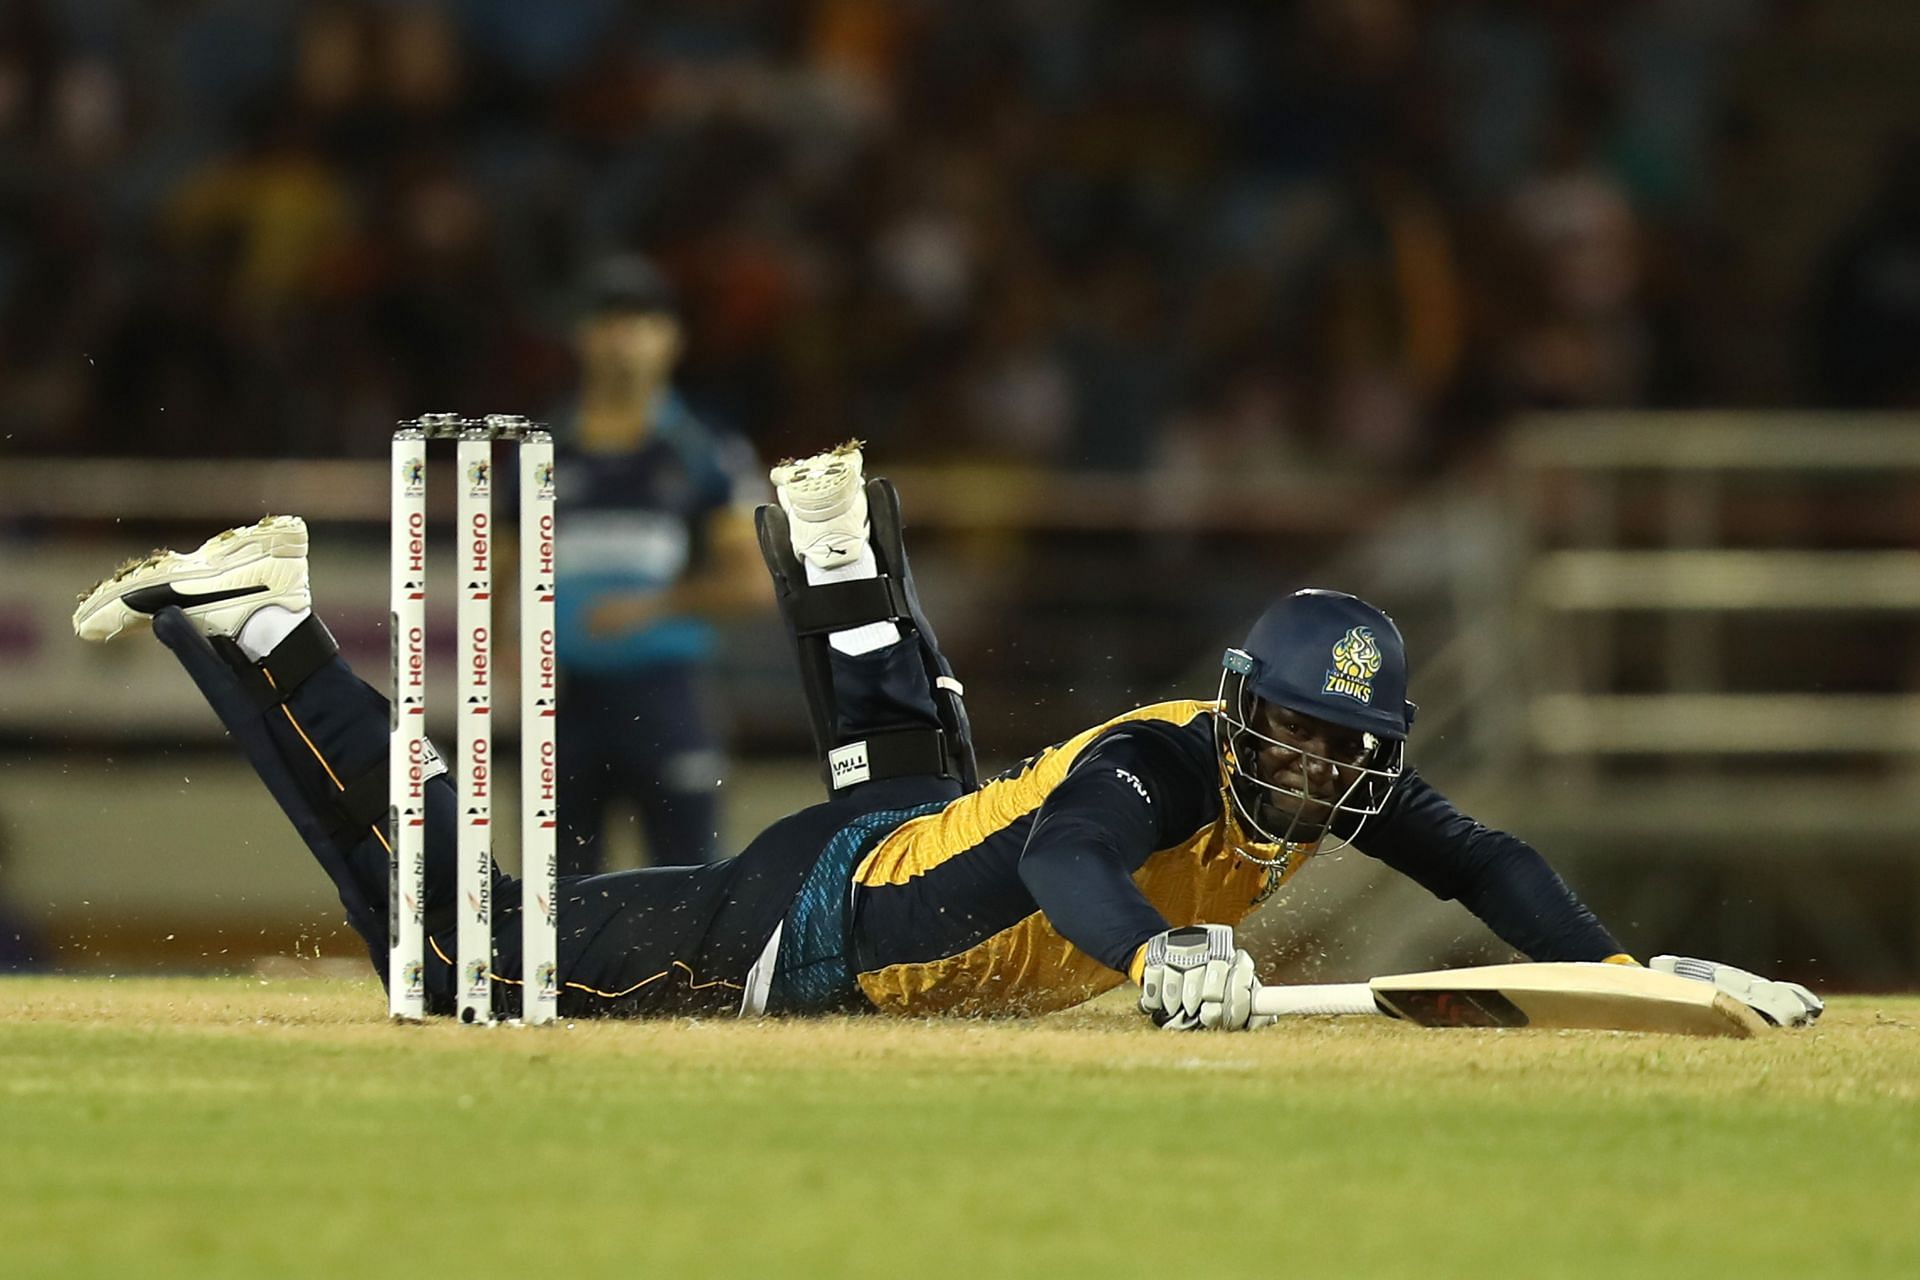 The St Lucia T10 Blast began on May 6